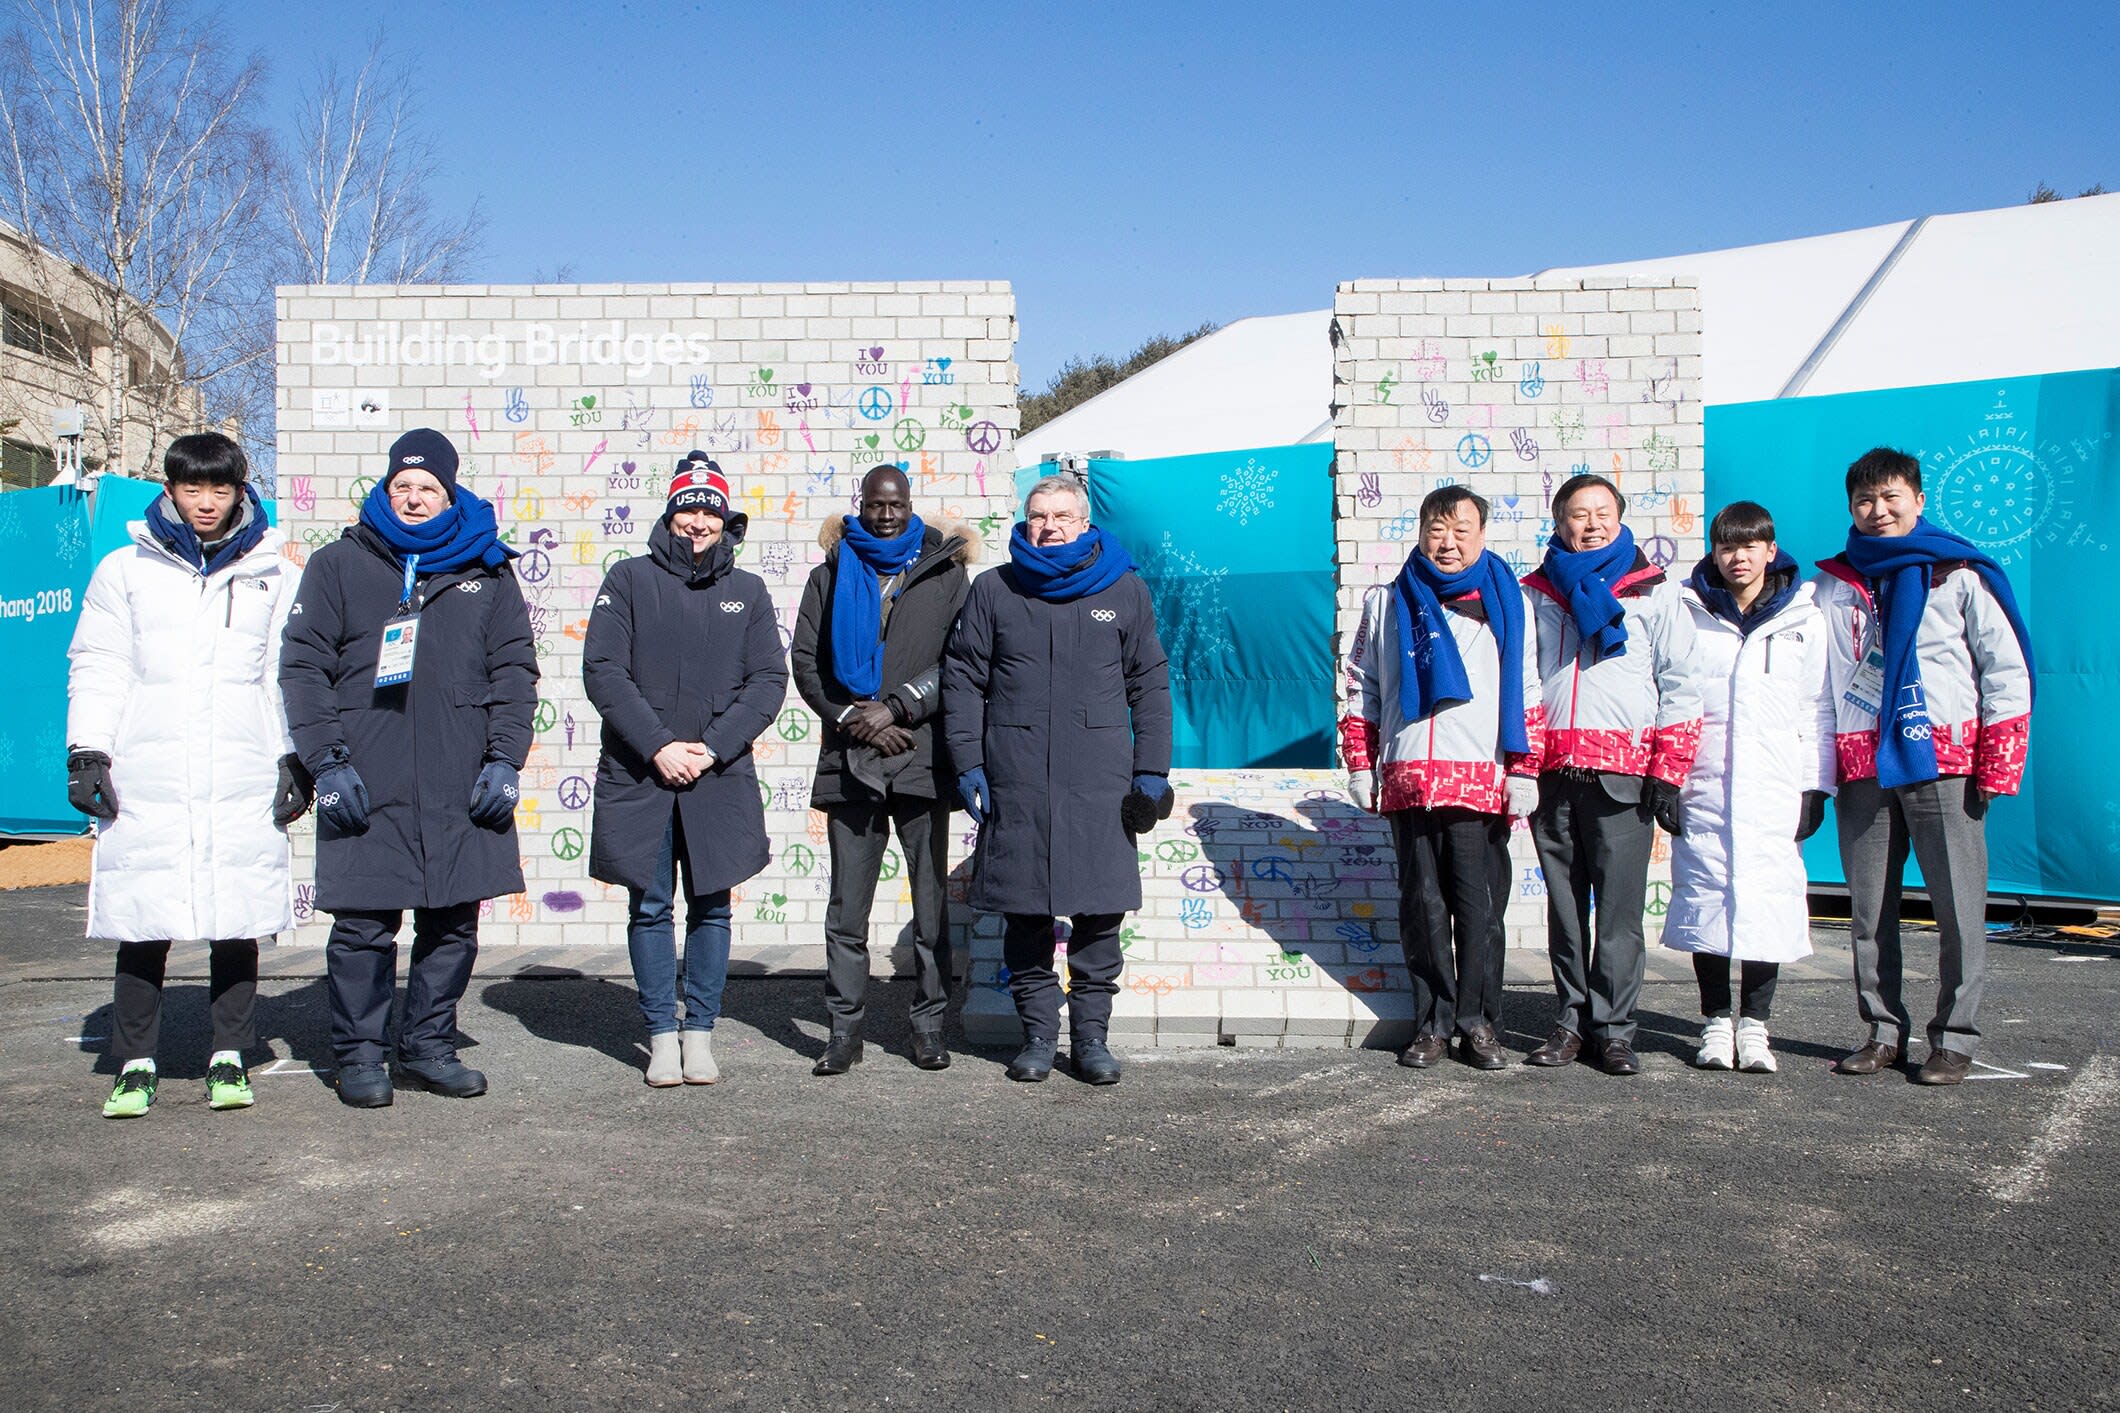 The Olympic Village in PyeongChang unveils the Olympic Truce Mural, created by South Korean artist Jaeseok Lee